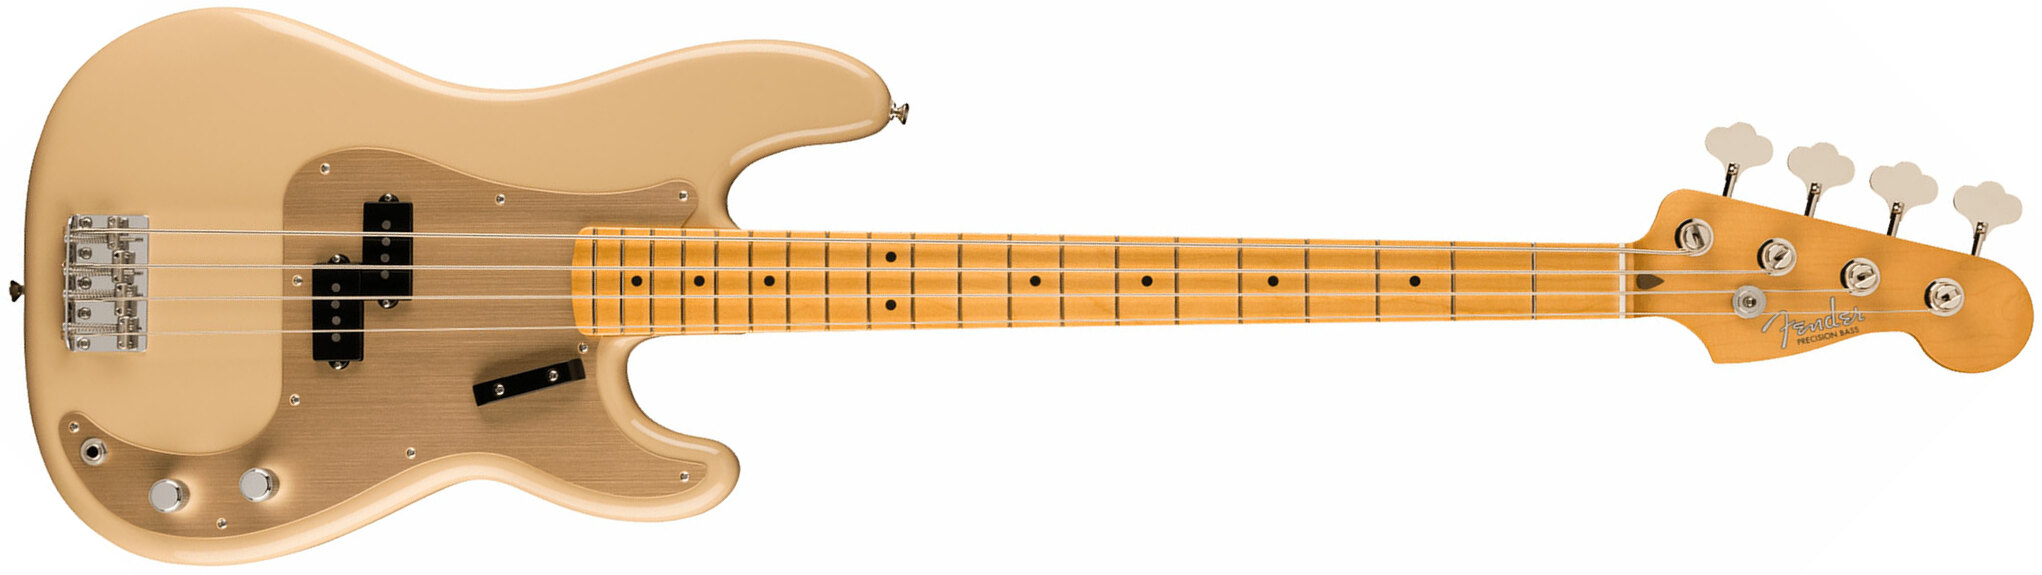 Fender Precision Bass 50s Vintera Ii Mex Mn - Desert Sand - Solid body electric bass - Main picture